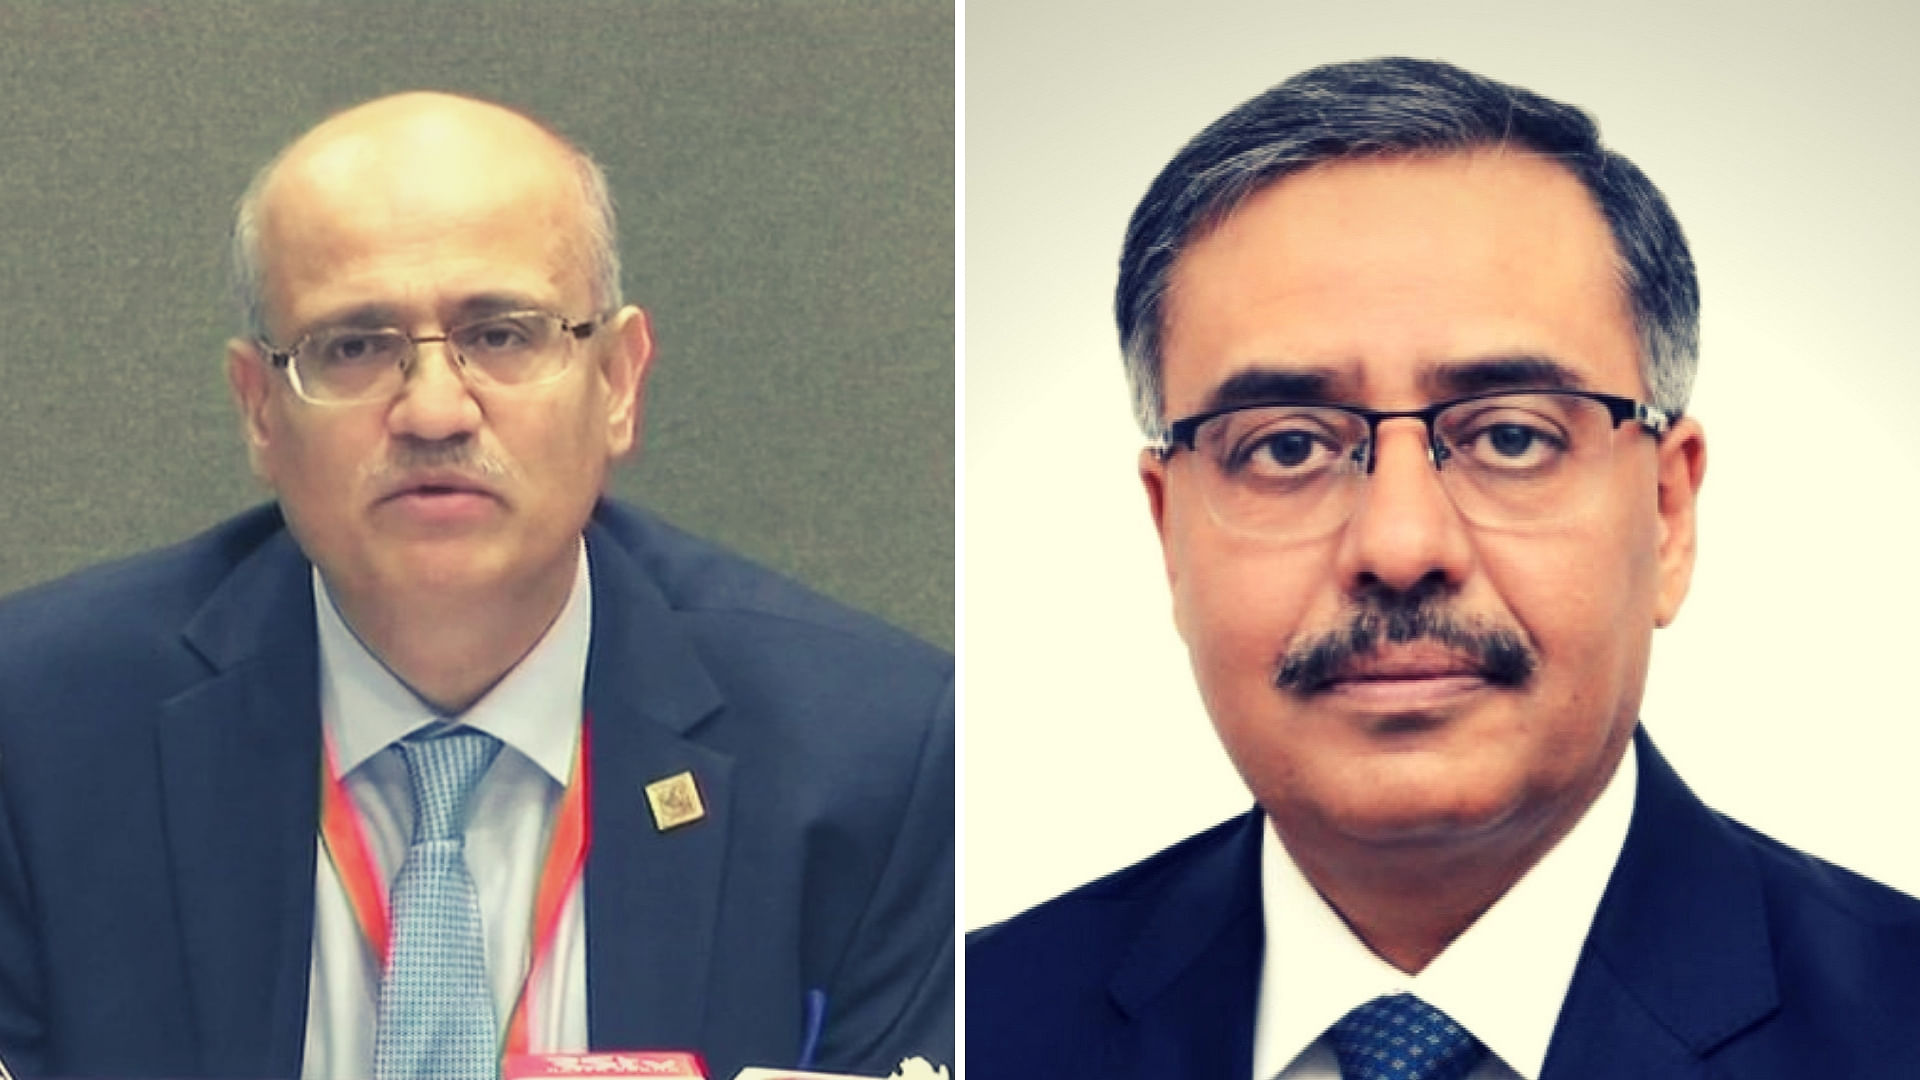 Foreign Secretary Vijay Gokhale (left) summoned Pak Envoy Sohail Mahmood (right) and told him that Pakistan Foreign Minister’s conversation with Mirwaiz Umar Farooq was a “brazen attempt” to subvert India’s unity and violate its territorial integrity.